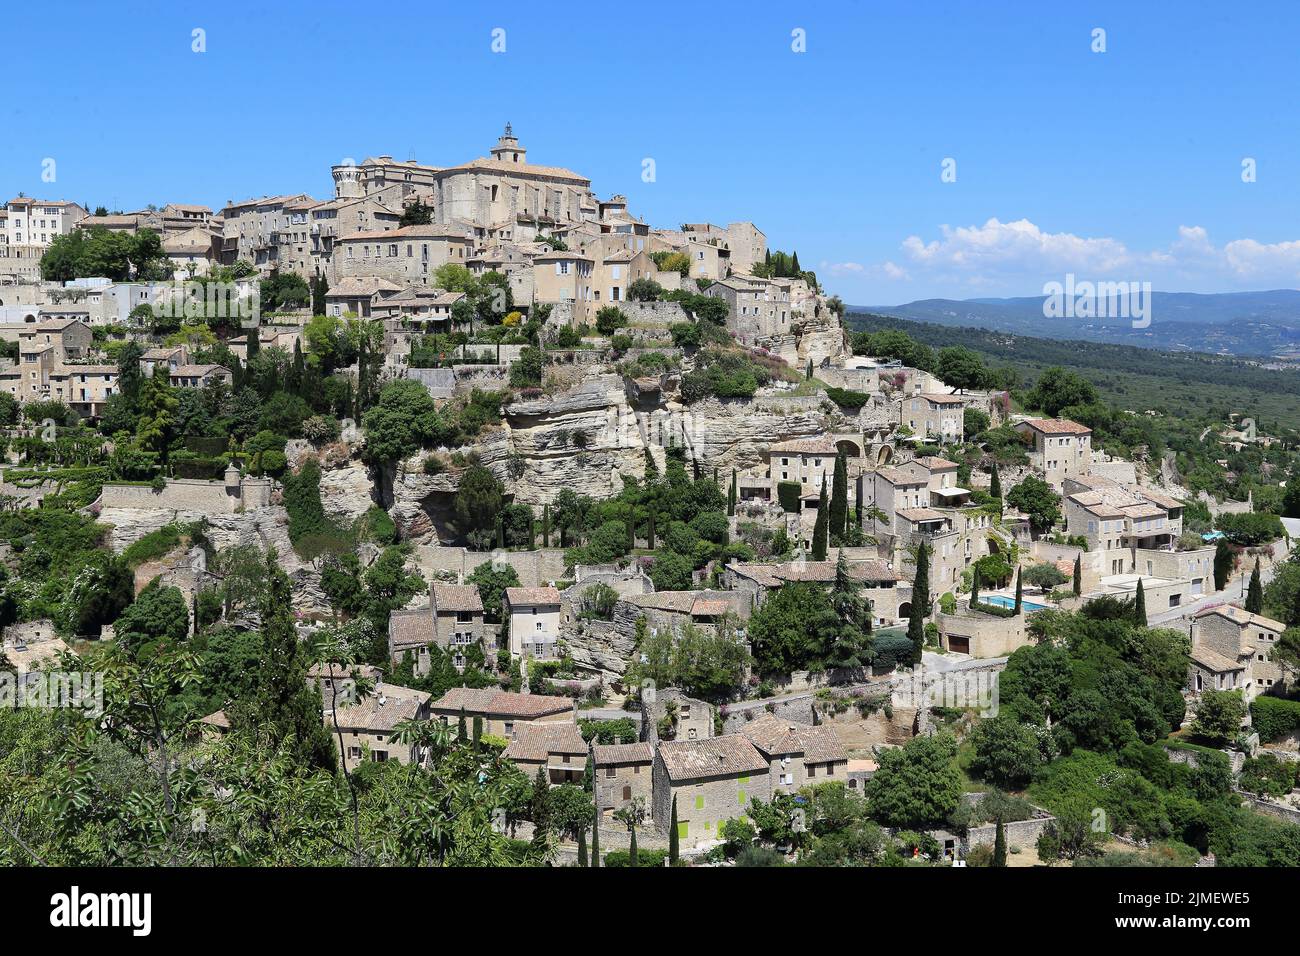 GORGES, FRANCE - MAY 17, 2015: This is a view of one of the most picturesque villages of Provence in the Luberon Valley. Stock Photo